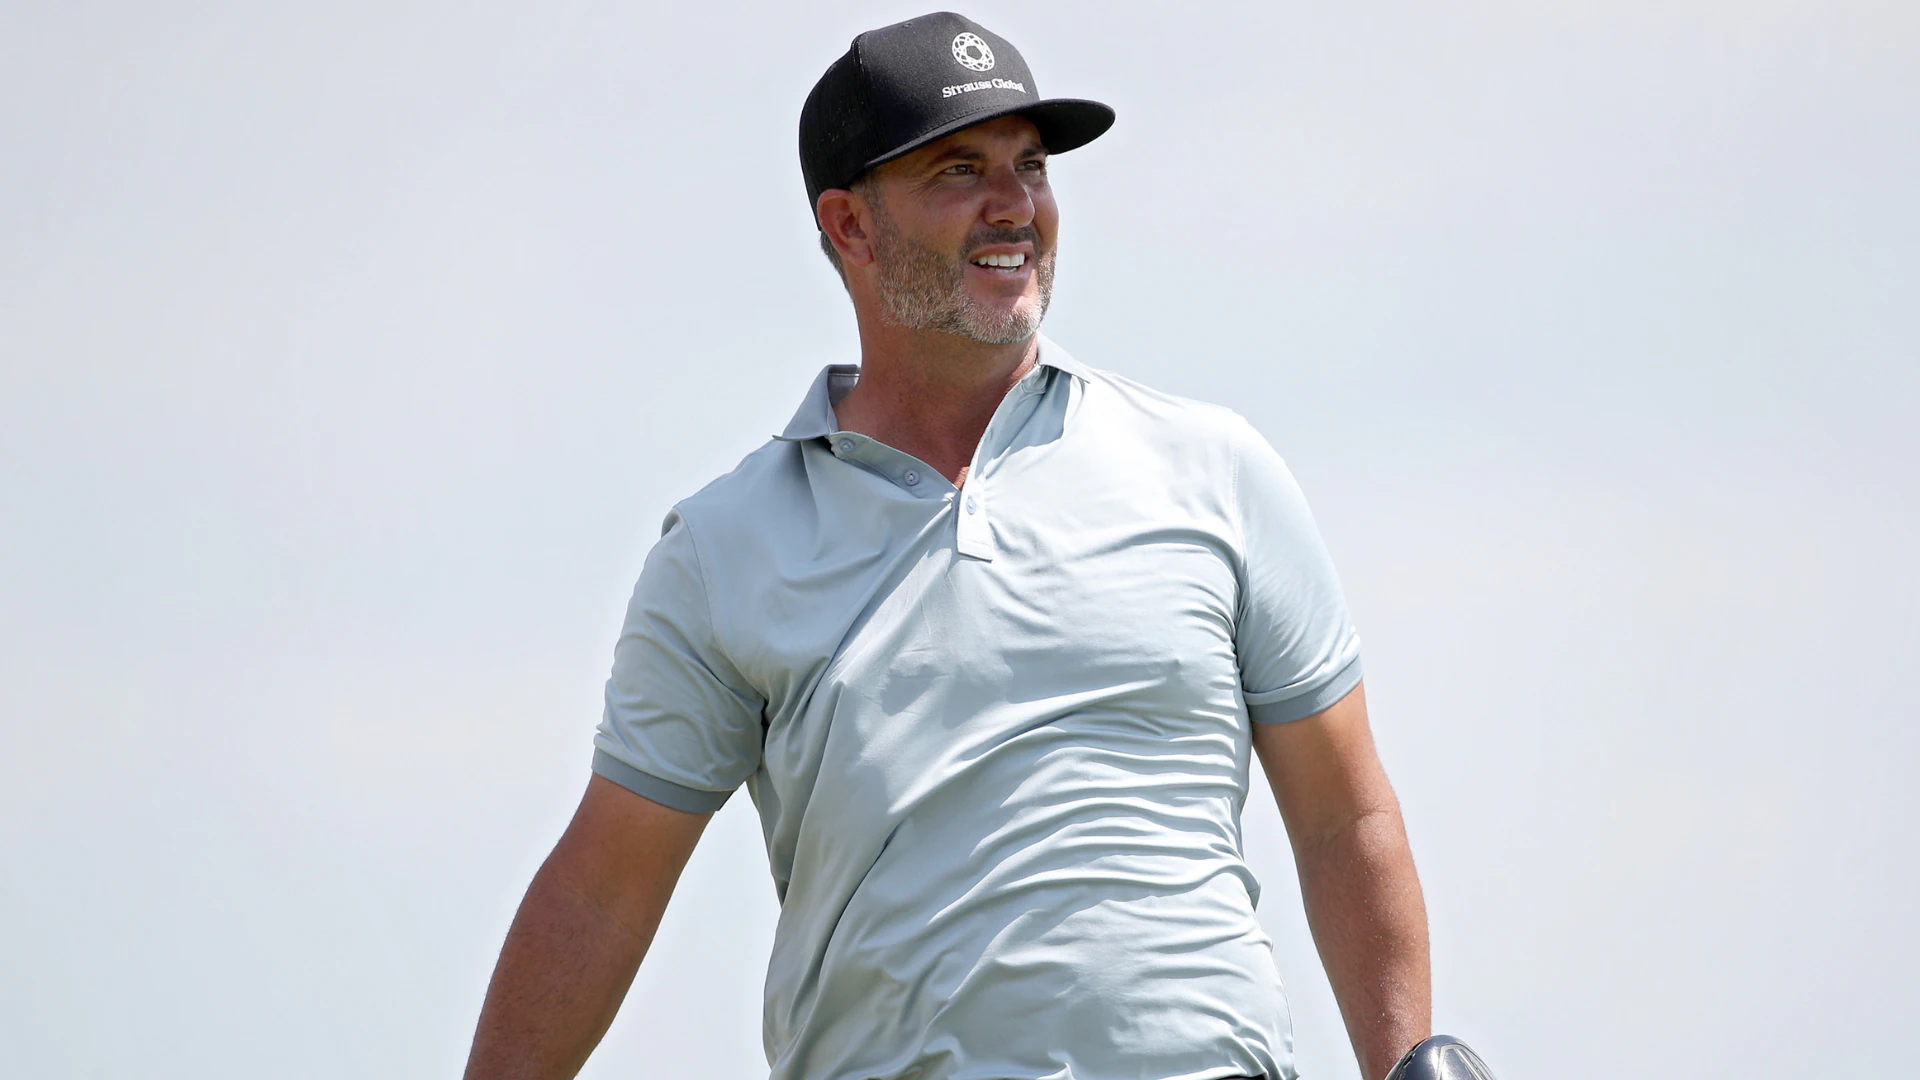 Scott Piercy extends lead through 36 holes with Friday 64 at 3M Open